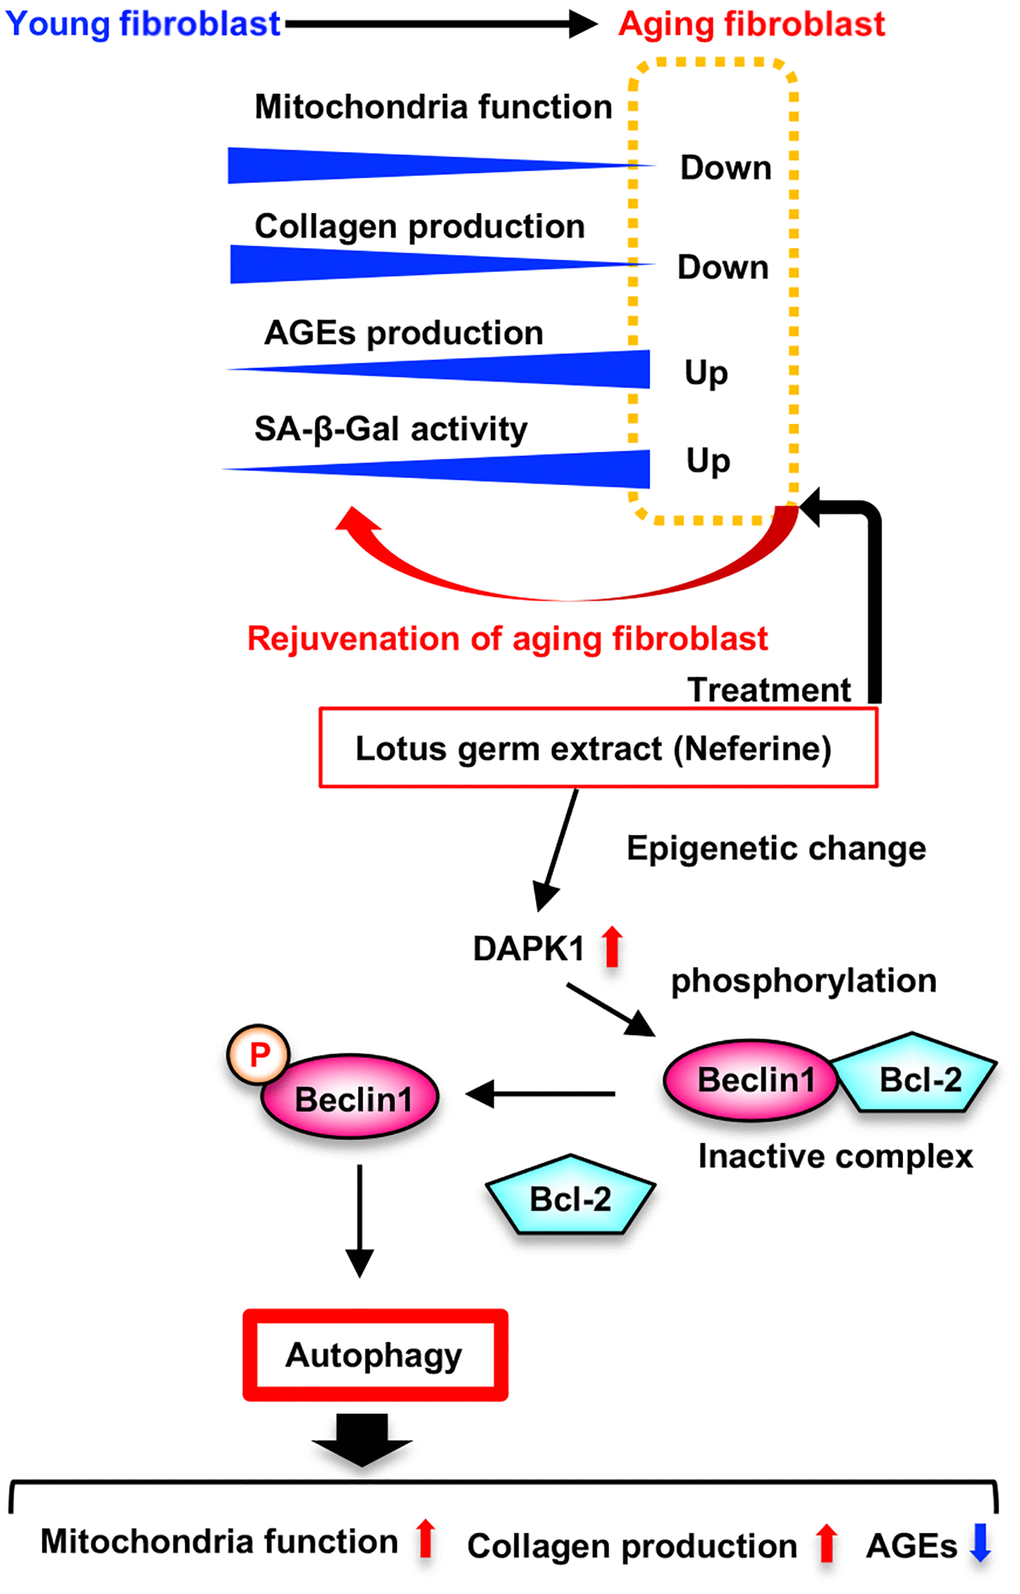 Model for rejuvenated effect of lotus germ extract (Neferine) in aging fibroblast. Aging fibroblasts downregulates mitochondria function and collagen production, and upregulates AGEs production and SA-β-gal activity. Lotus germ extract (Neferine) treatment rejuvenated aging fibroblasts by restoring the various phenotypes of aging via activation of DAPK1-Beclin1 signaling induced autophagy.